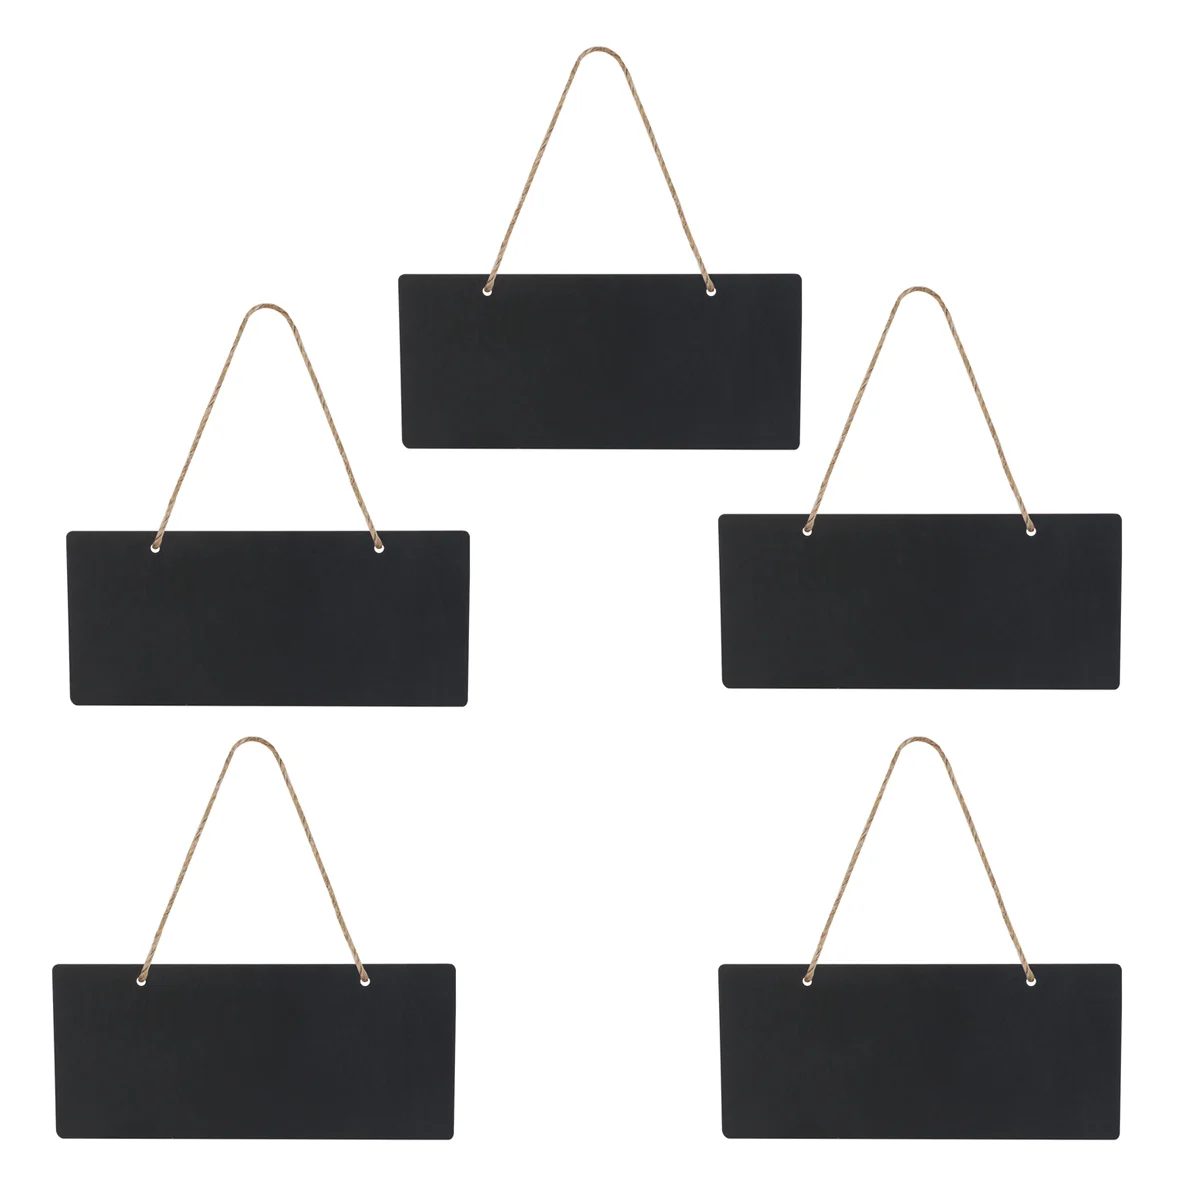 

Hanging Wood Display Board DIY Blackboard Signs Message Boards Chalkboard Tags FOR Home Decoration